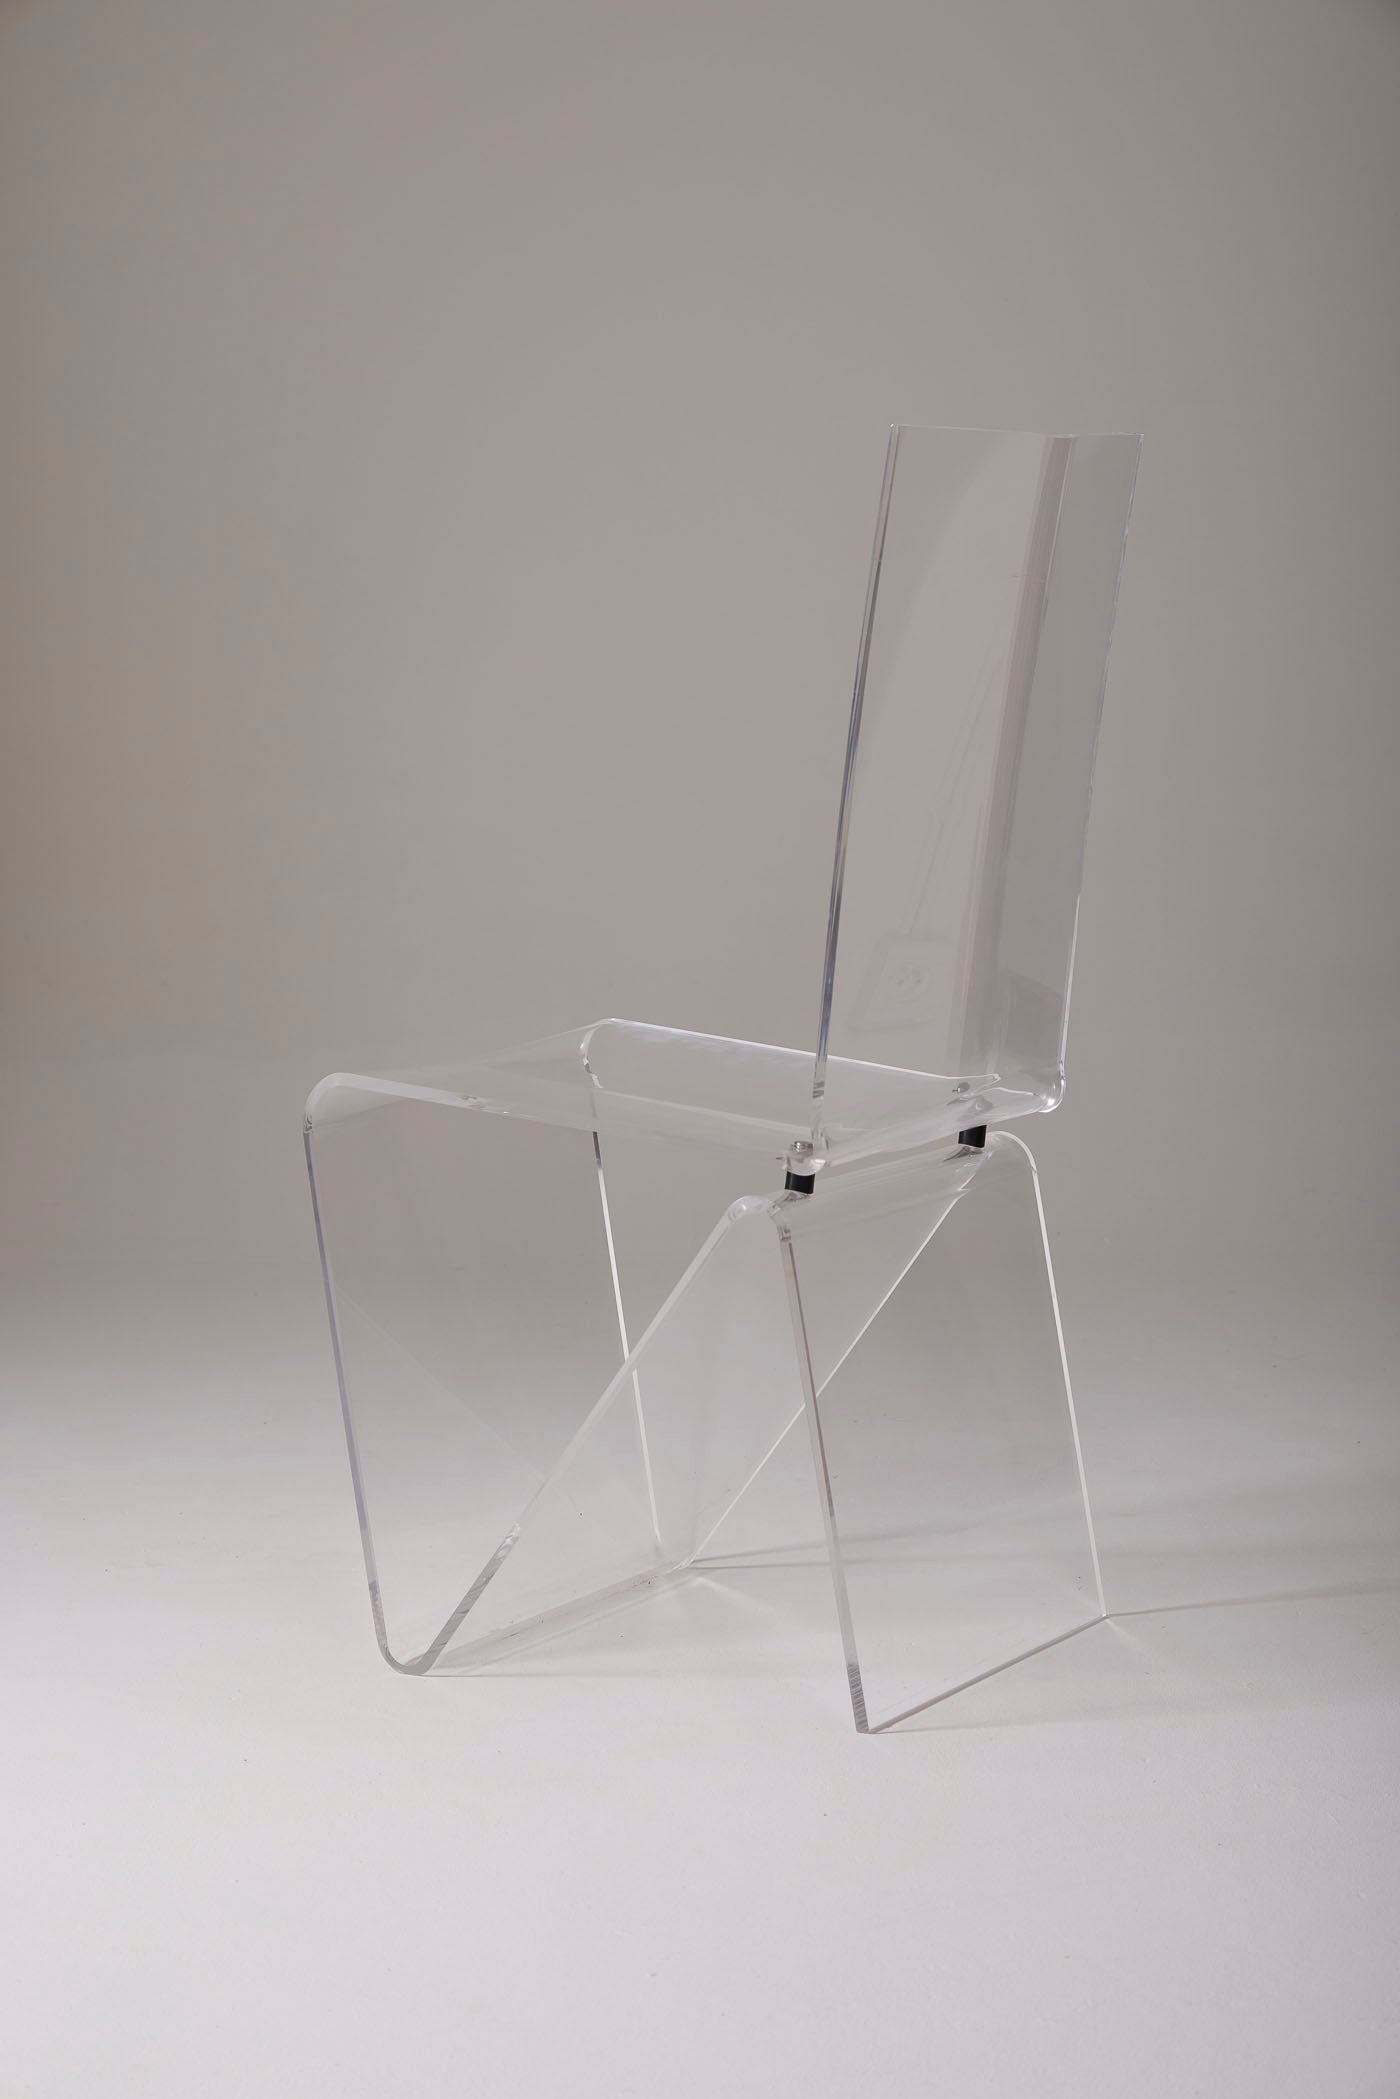 Maurice Marty chair